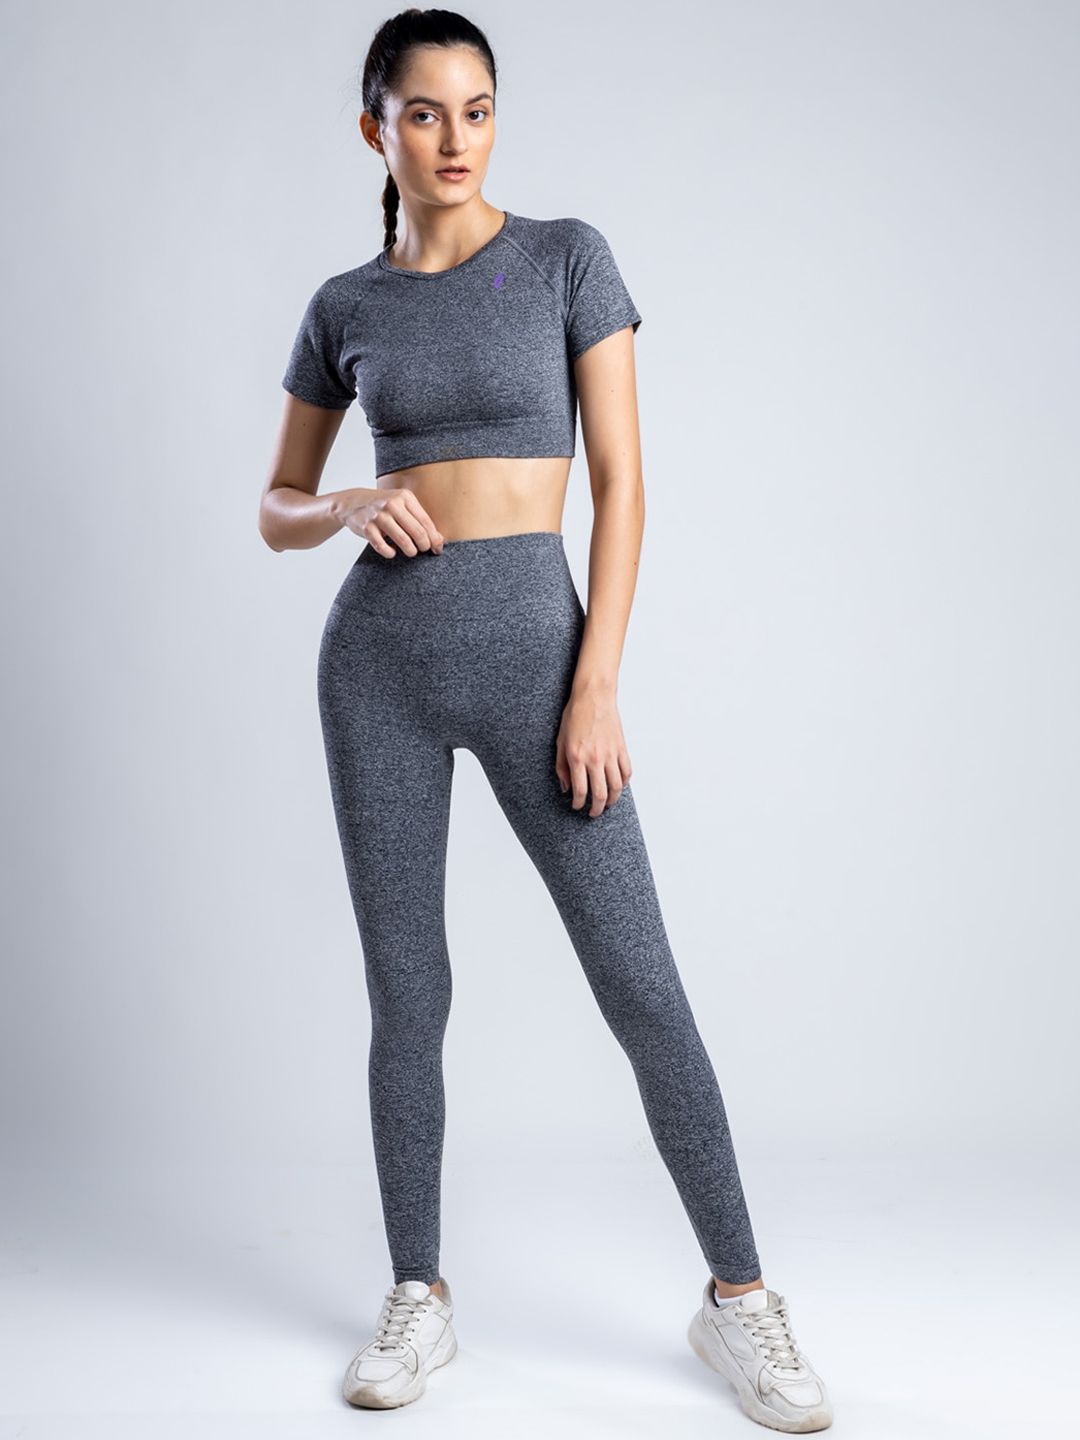 SKNZ Women Grey Solid Tracksuits Price in India